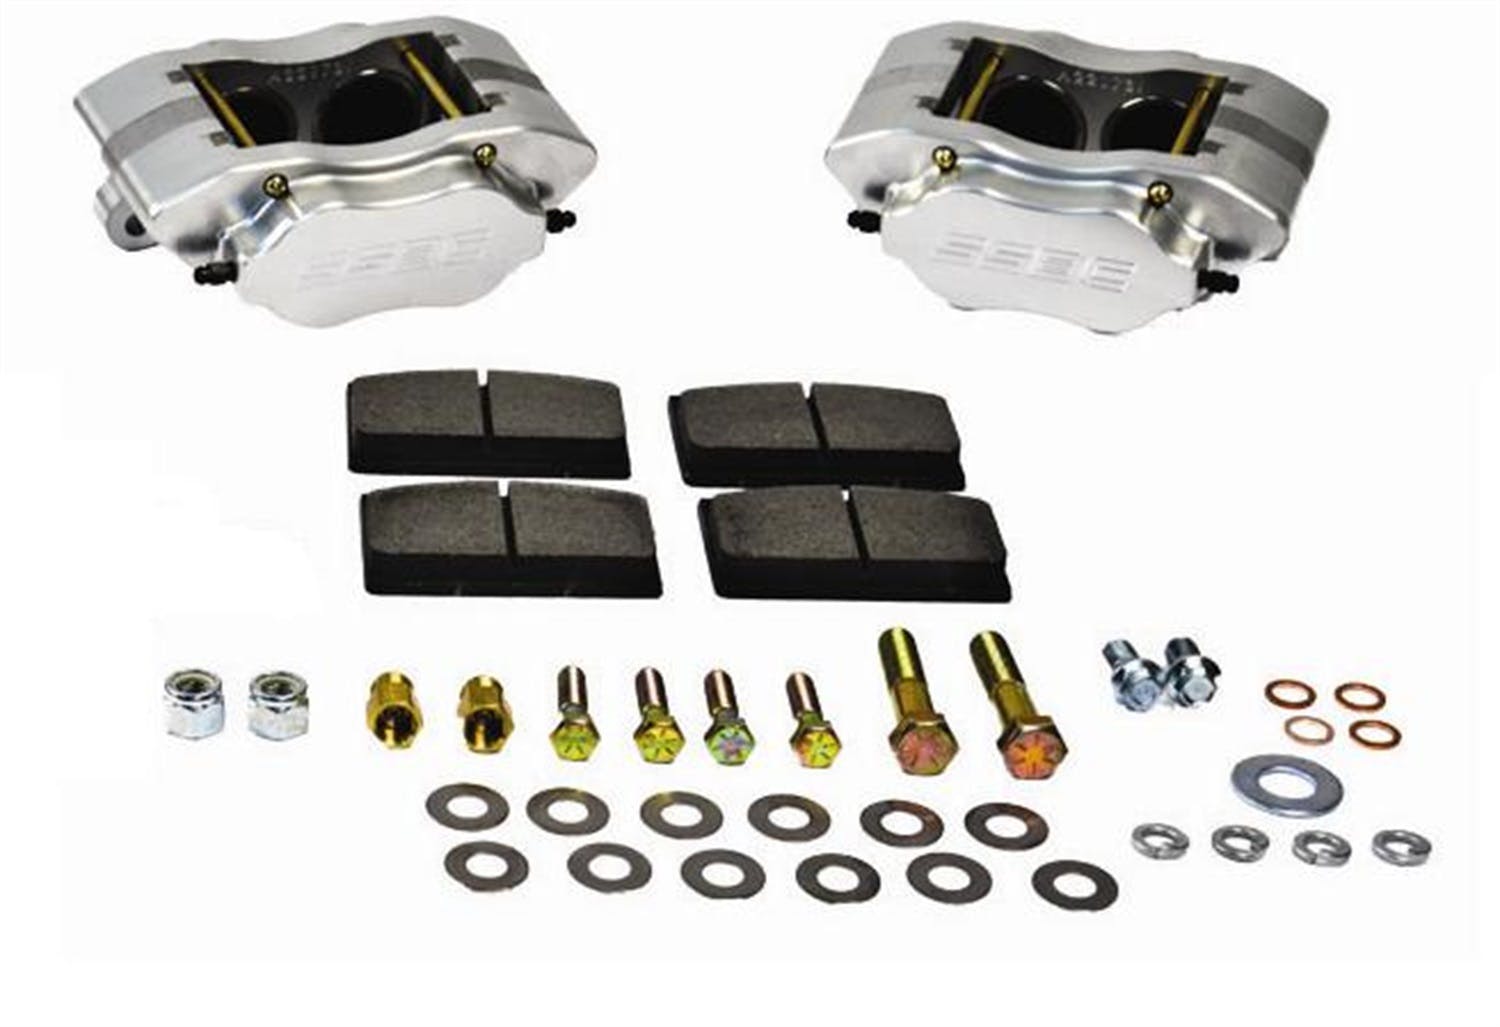 Stainless Steel Brakes A198BK Q/C Comp R A198 kit w/black calipers